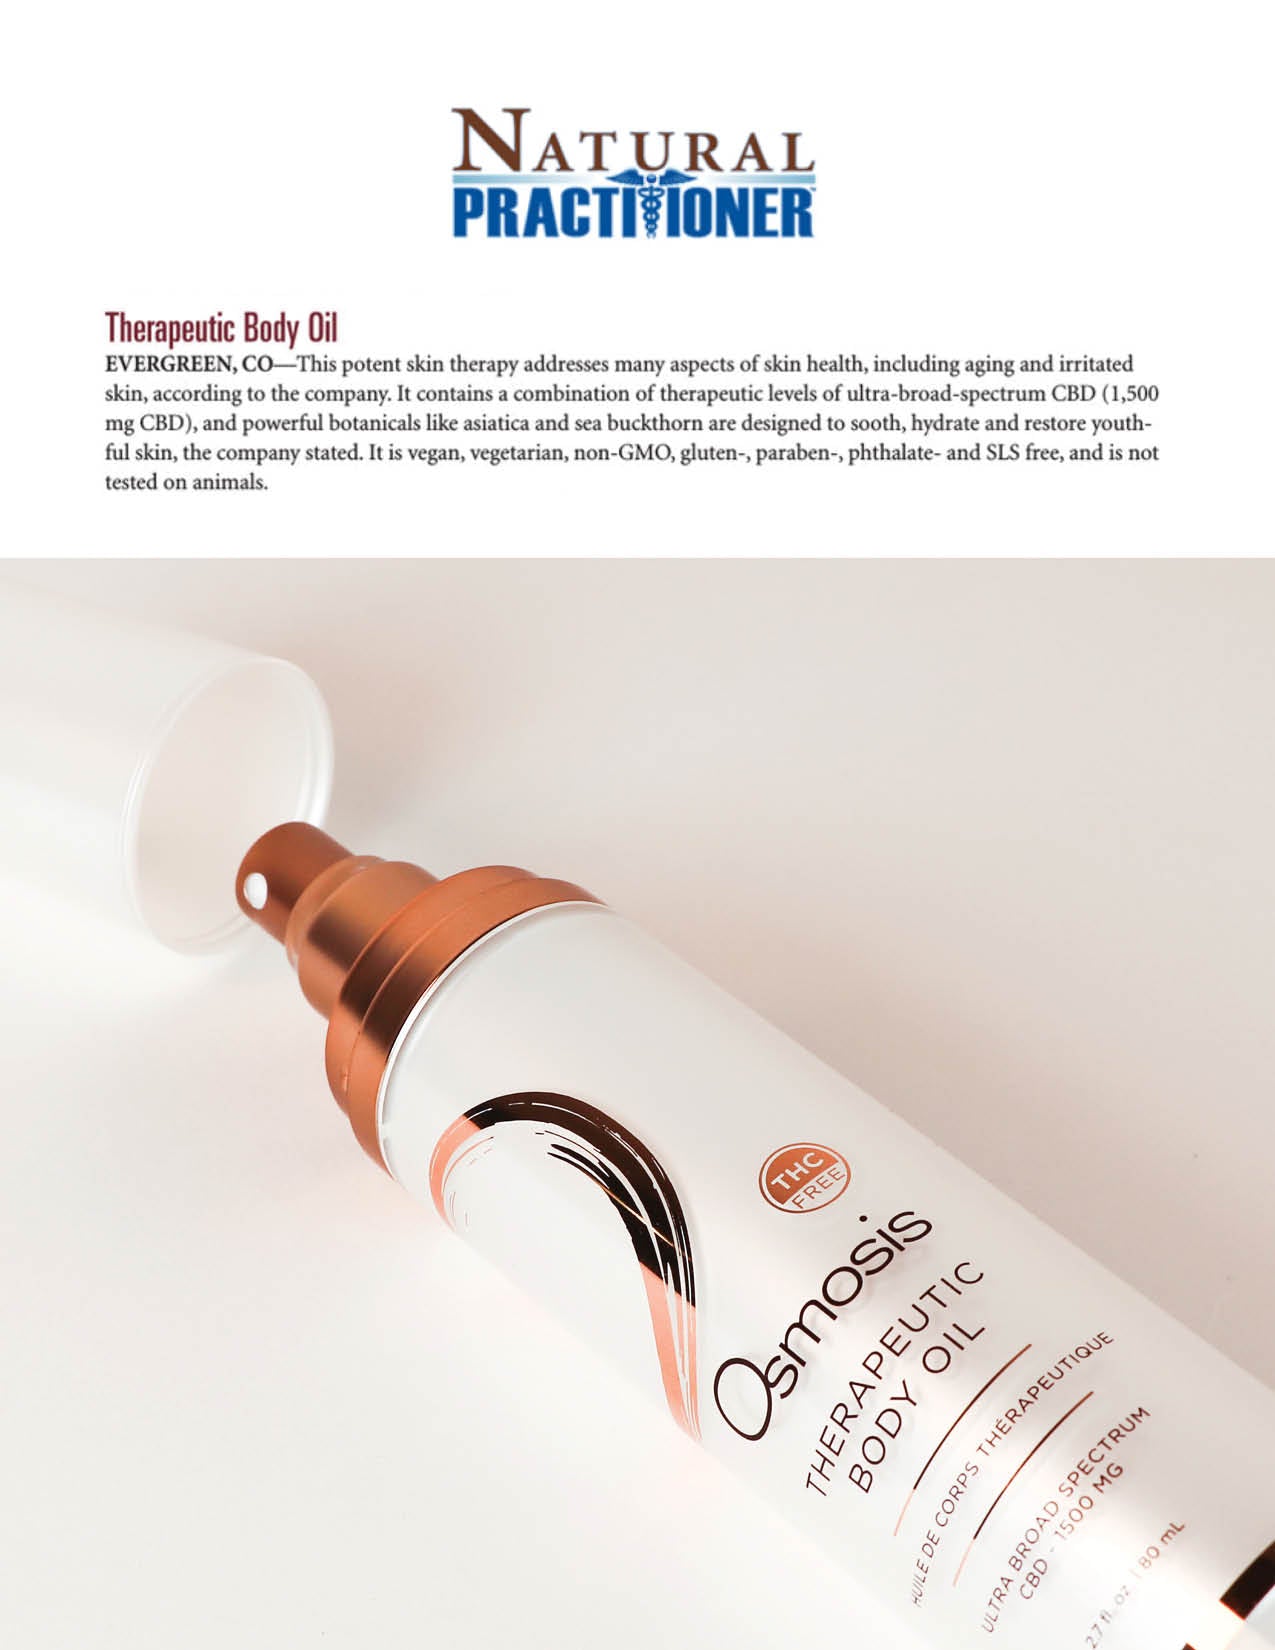 Therapeutic Body Oil was featured in the March/April issue of Natural Practitioner